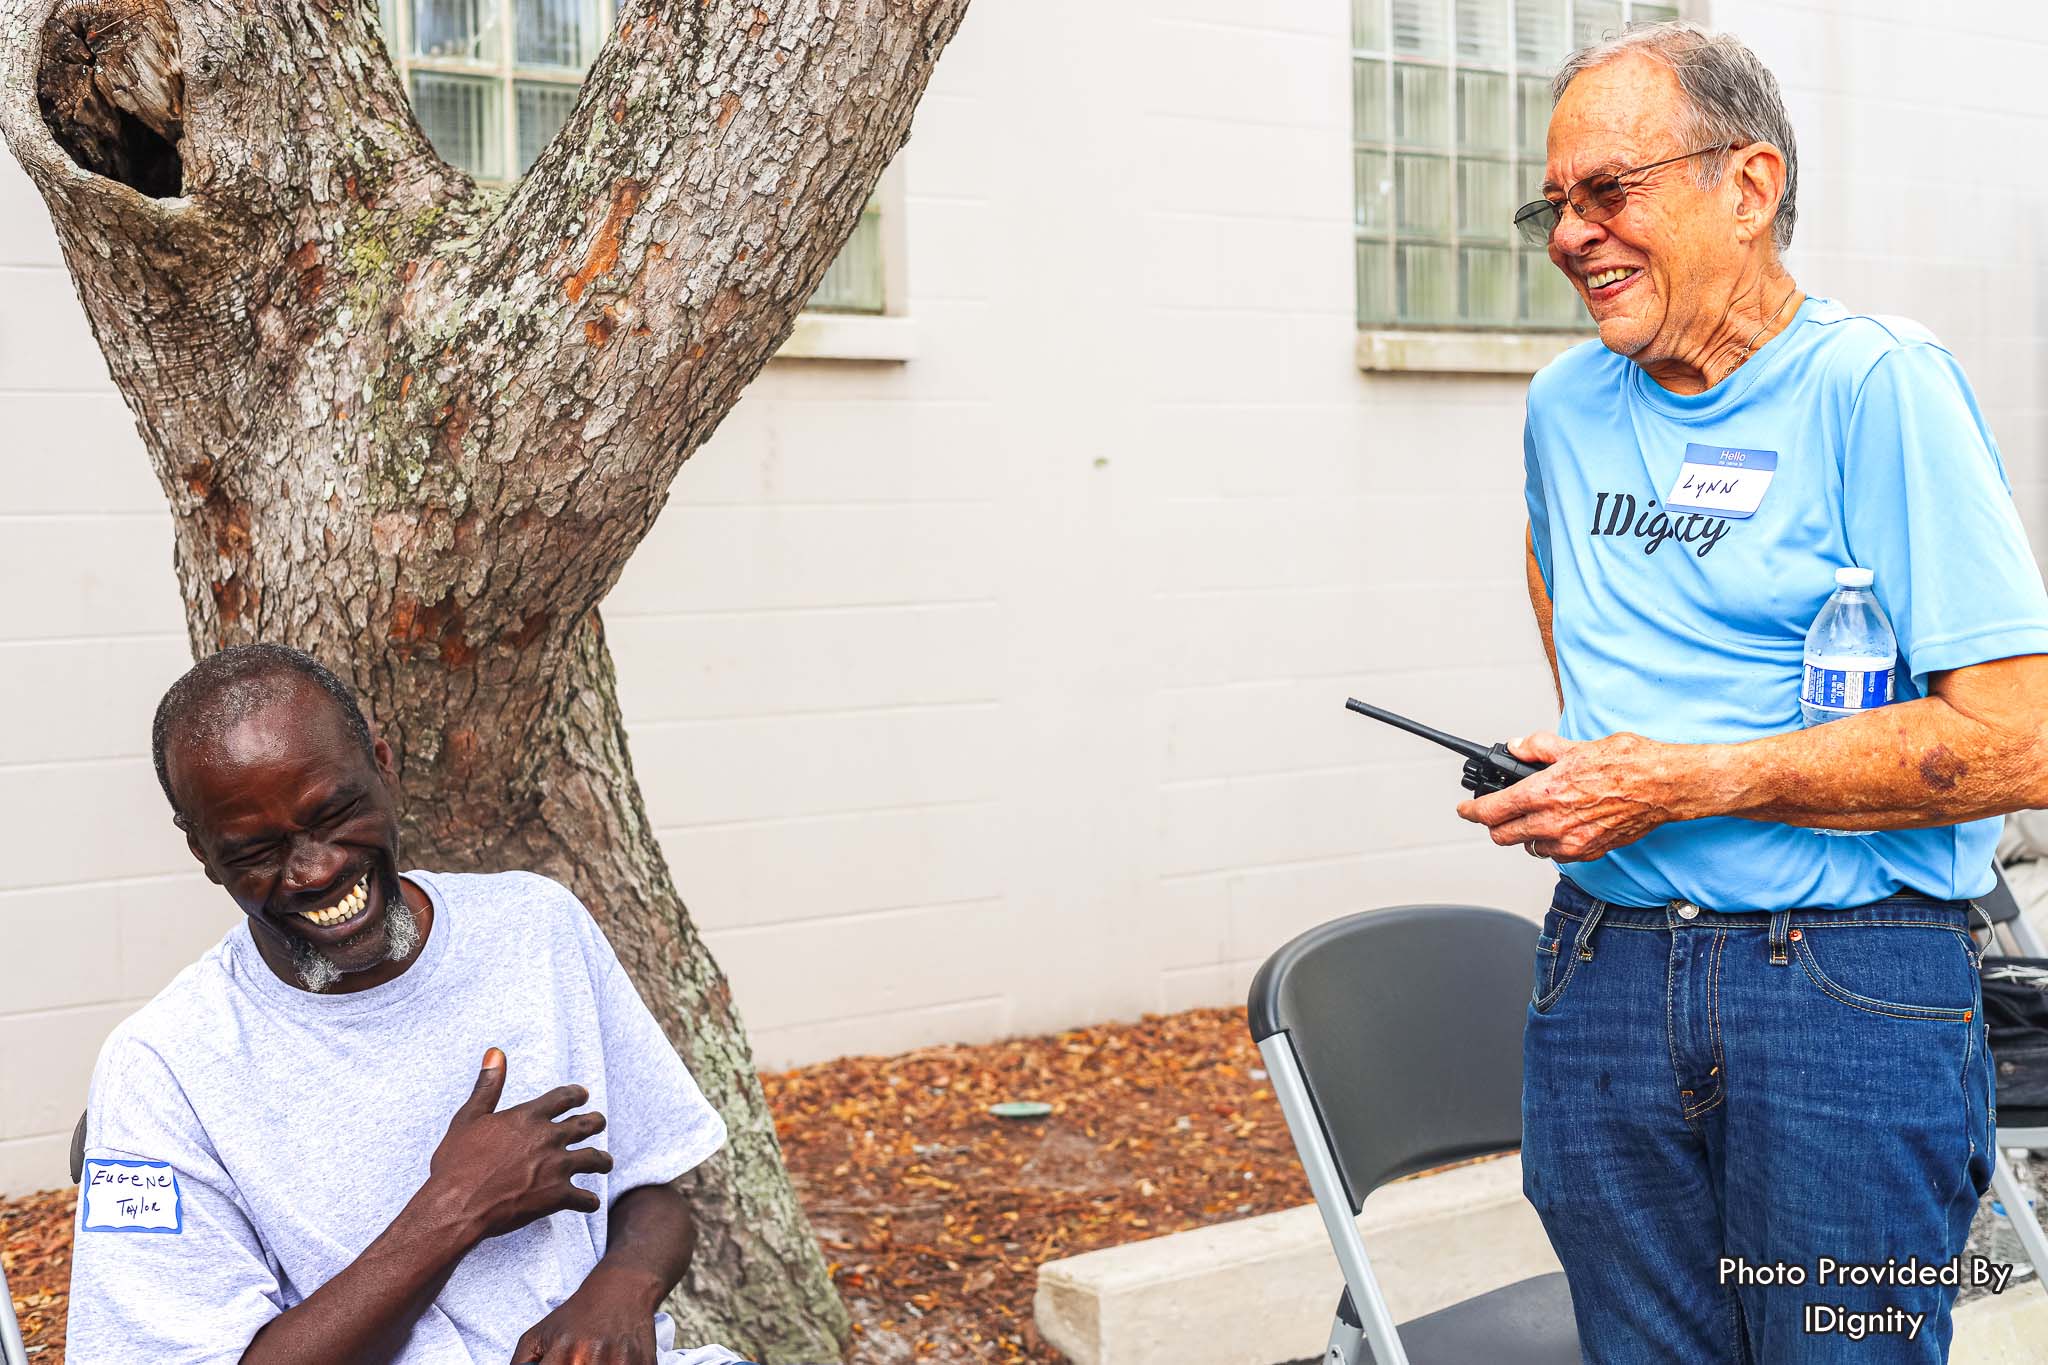 Volunteer Lynn shares a laugh with client Eugene. Helping our neighbors gain proof of their identity brings joy to both our volunteers and the clients that they serve. IDignity’s volunteers are essential to its mission to restore dignity and hope by providing identification.